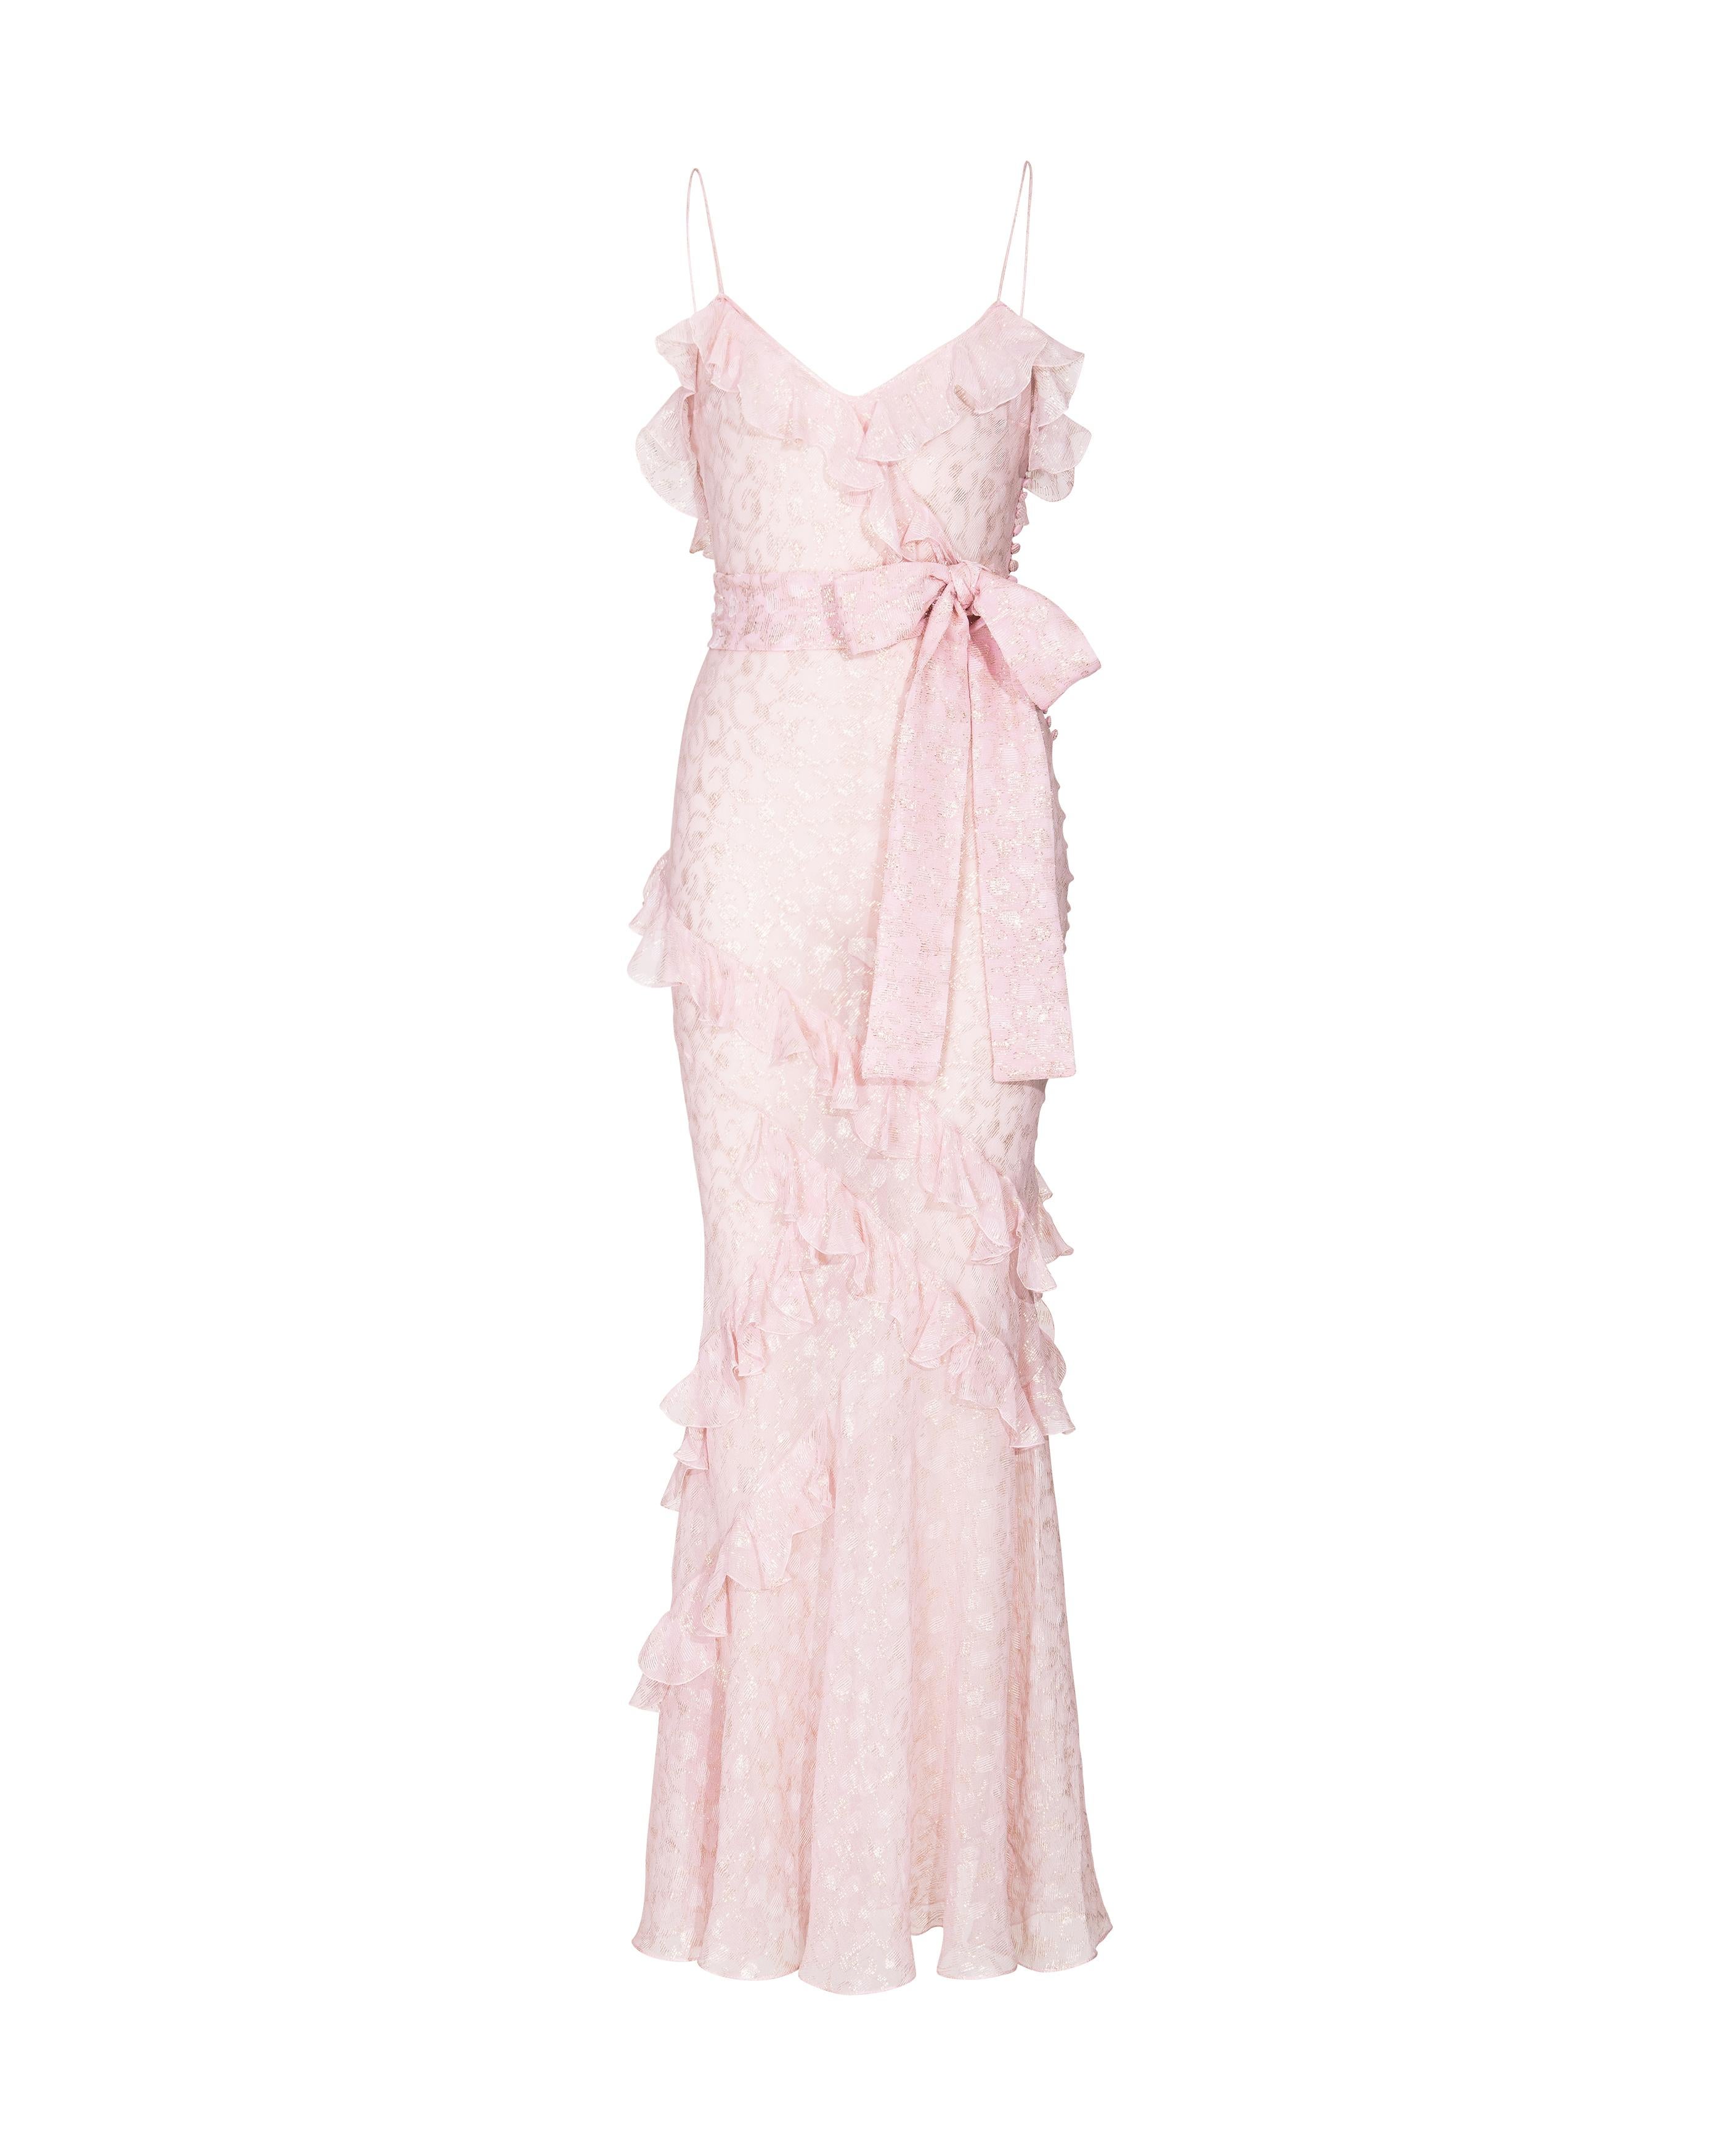 S/S 2004 Christian Dior by John Galliano Sheer Pink and Gold Ruffle Gown 7